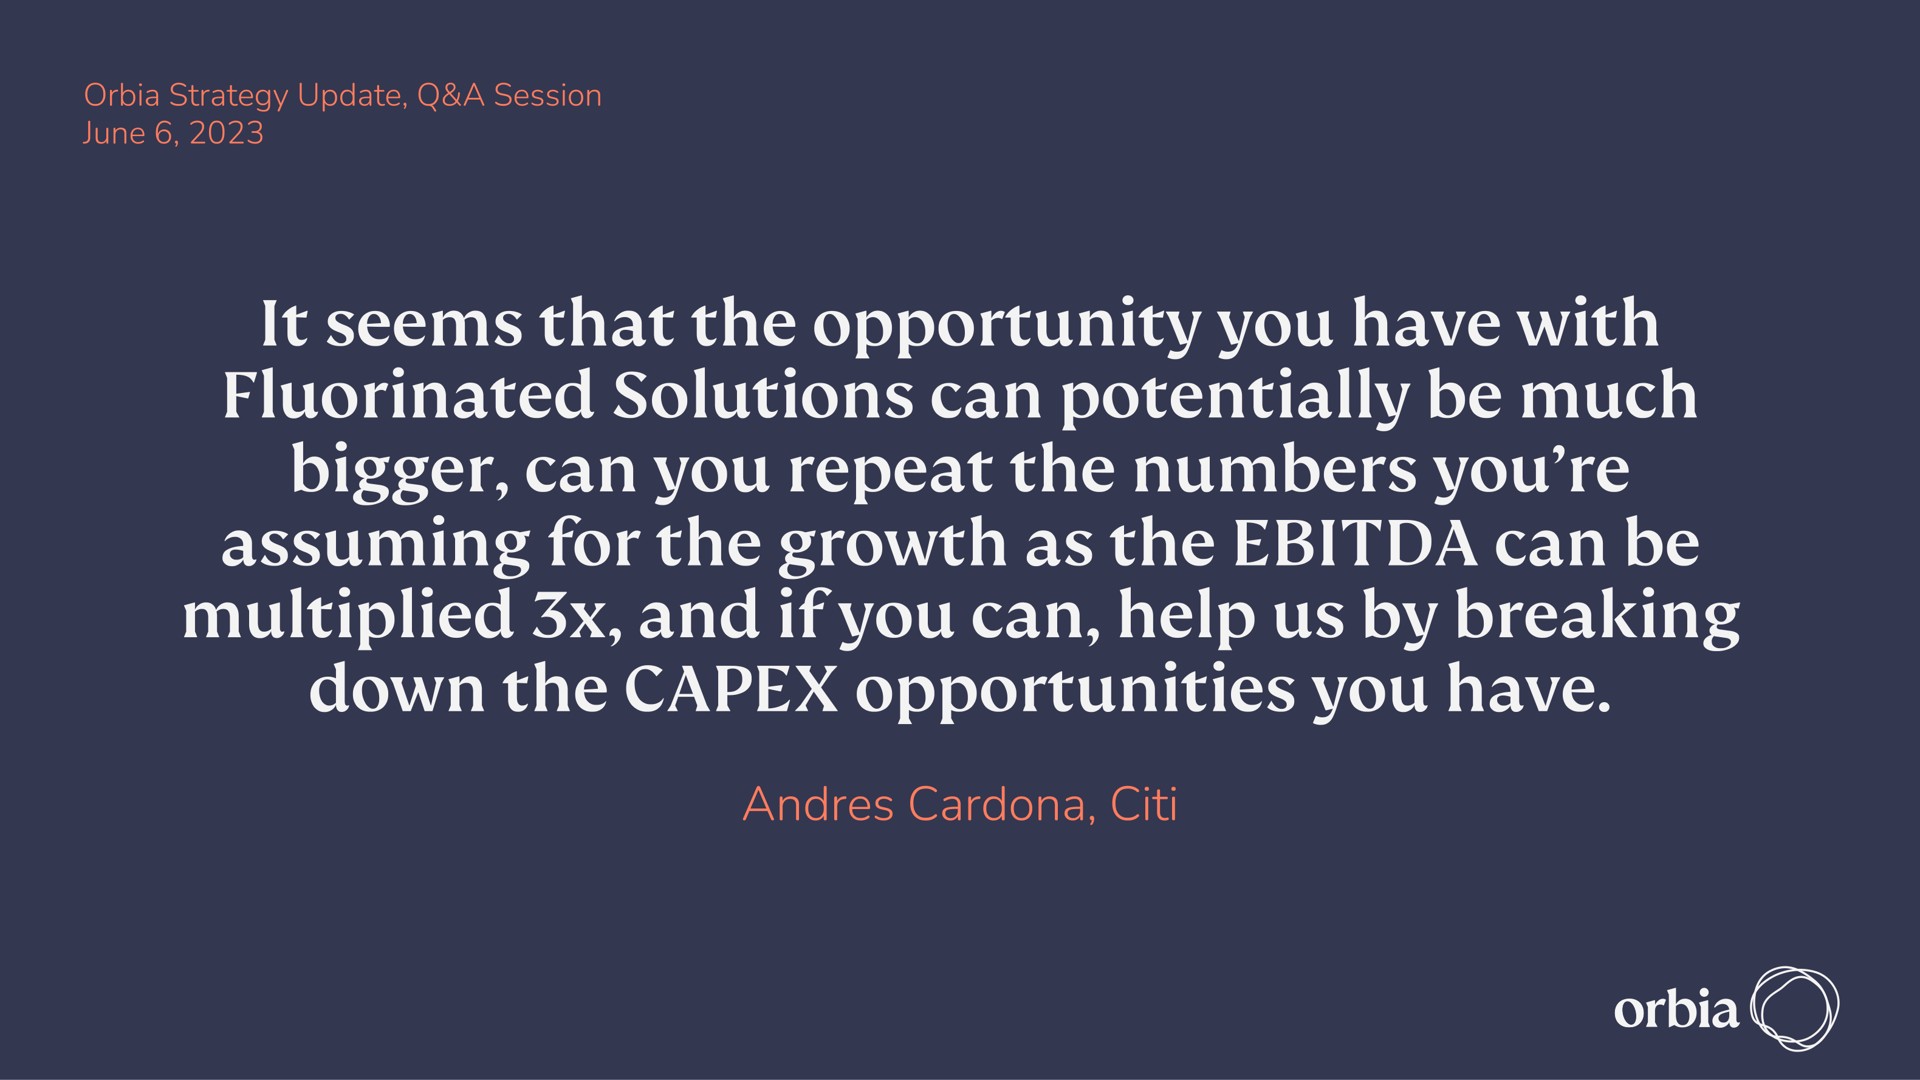 it seems that the opportunity you have with solutions can potentially be much bigger can you repeat the numbers you assuming for the growth as the can be multiplied and if you can help us by breaking down the opportunities you have rede | Orbia